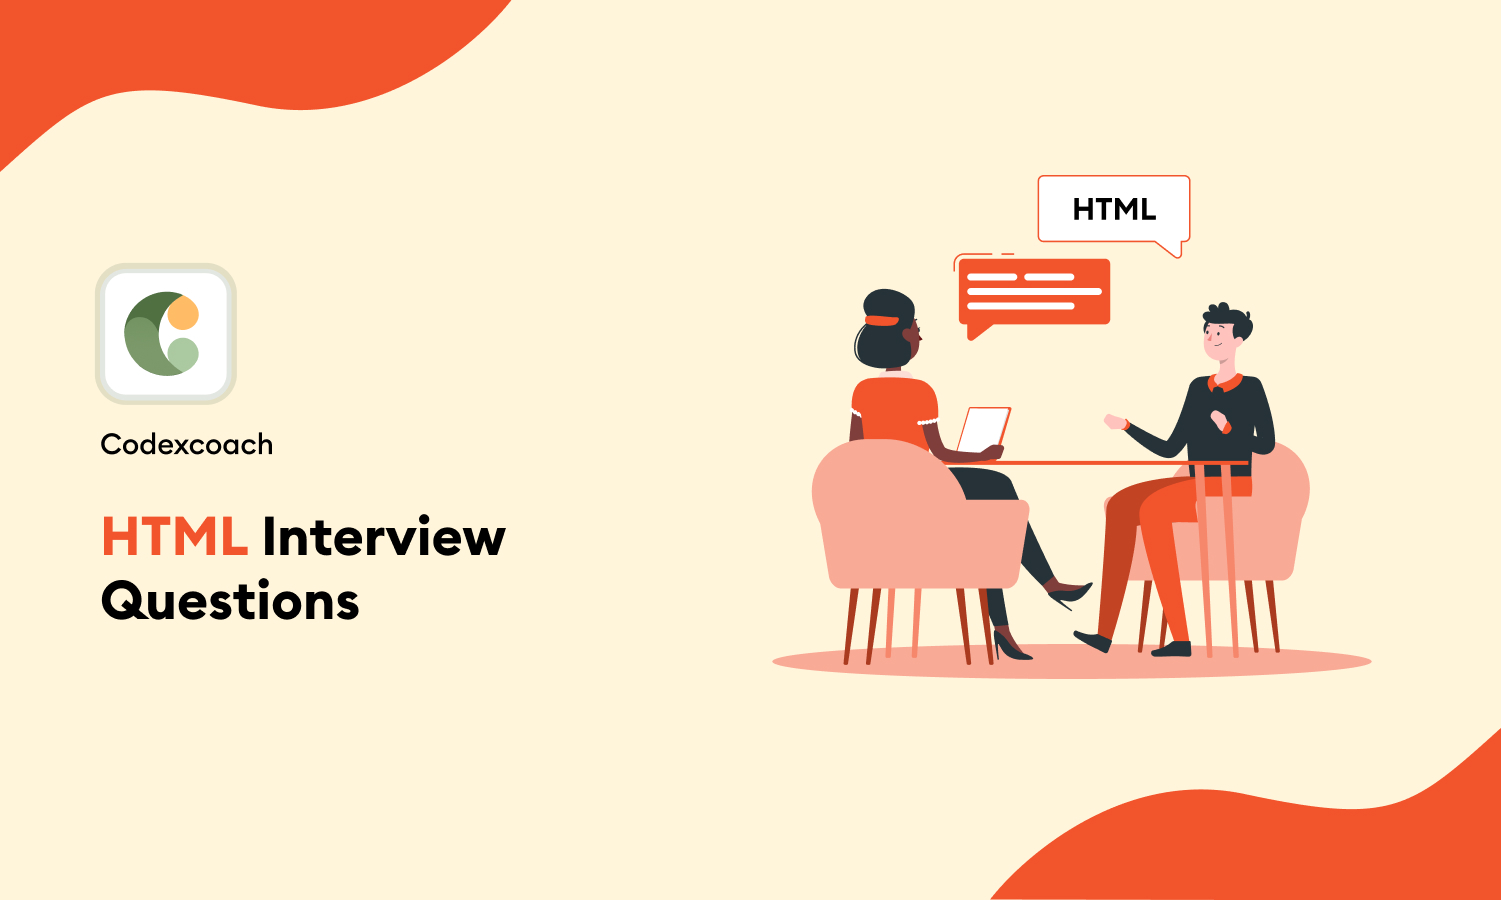 HTML Interview Questions